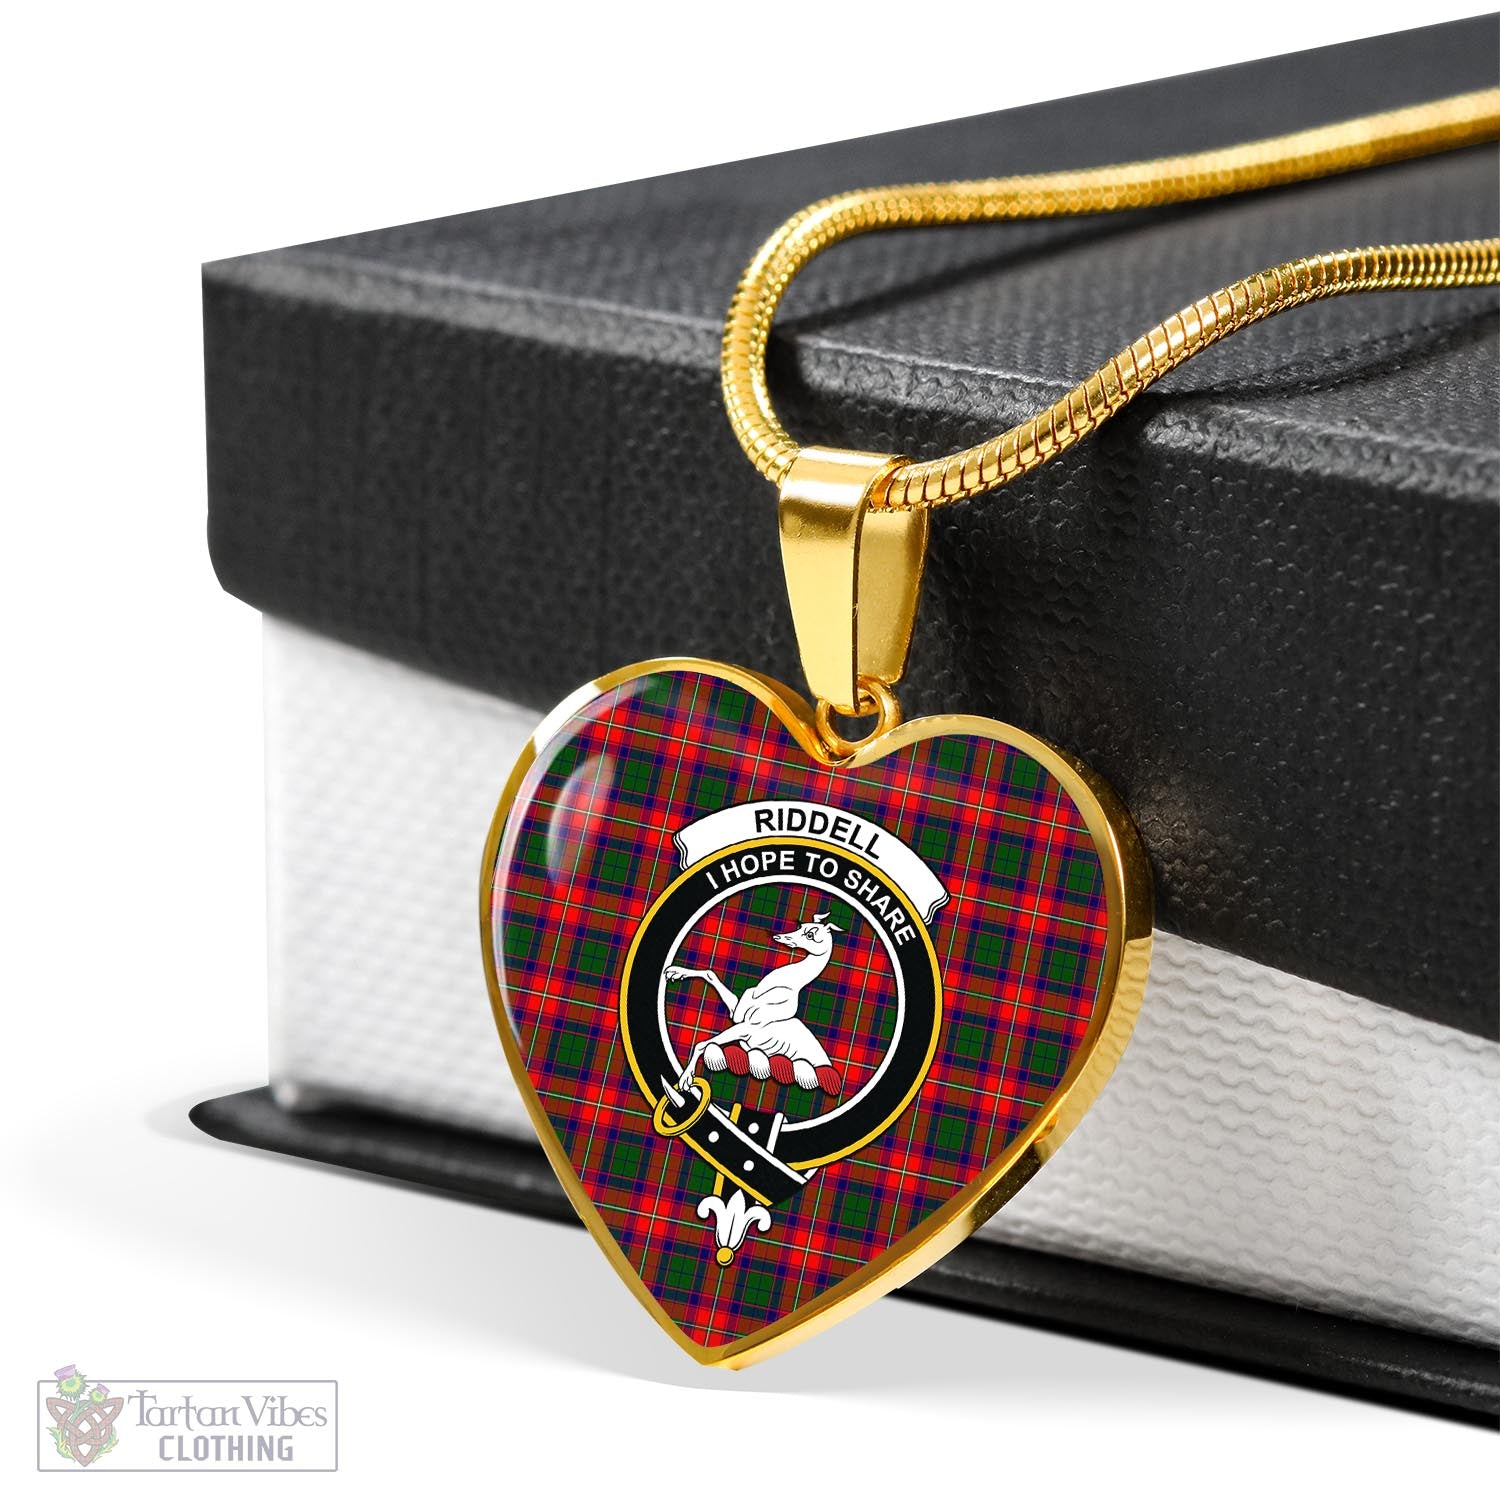 Tartan Vibes Clothing Riddell Tartan Heart Necklace with Family Crest